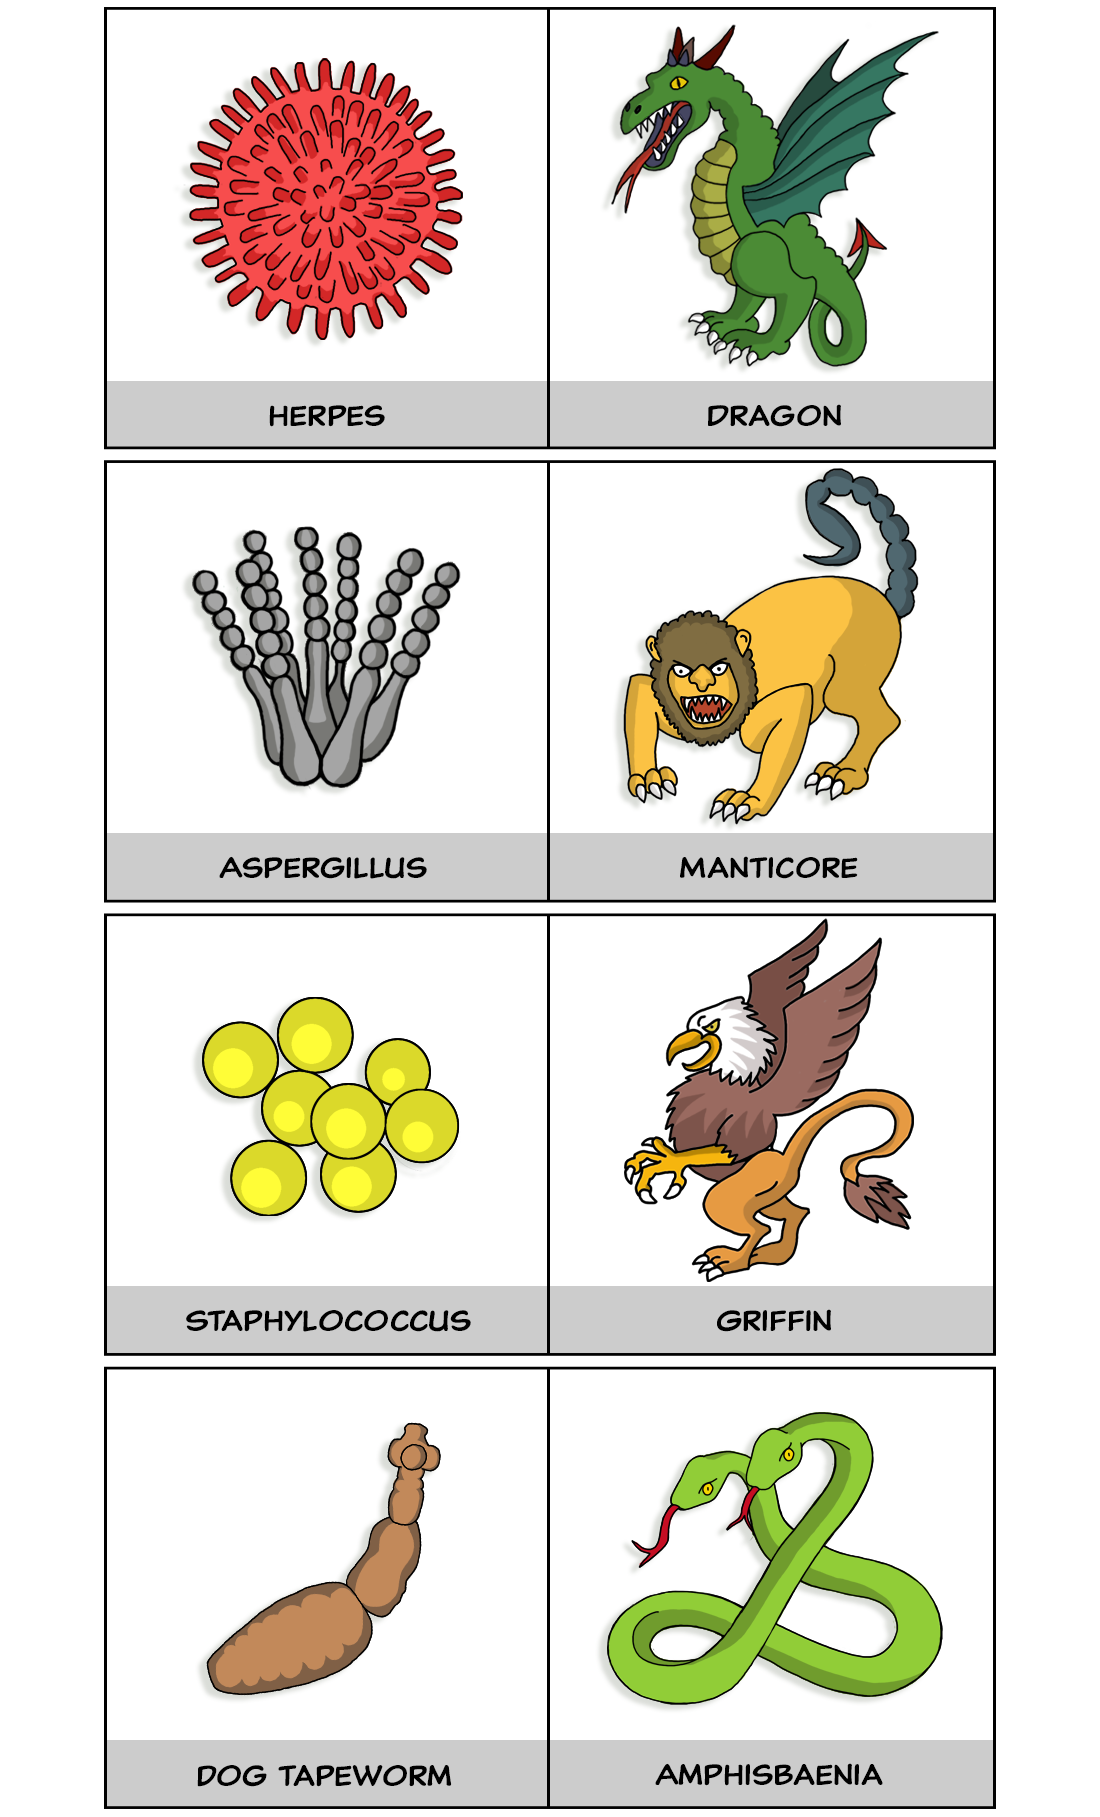 Illustrated herpes and dragon, aspergillus and manticore, staphylococcus and griffin, dog tapeworm and amphisbaenia.